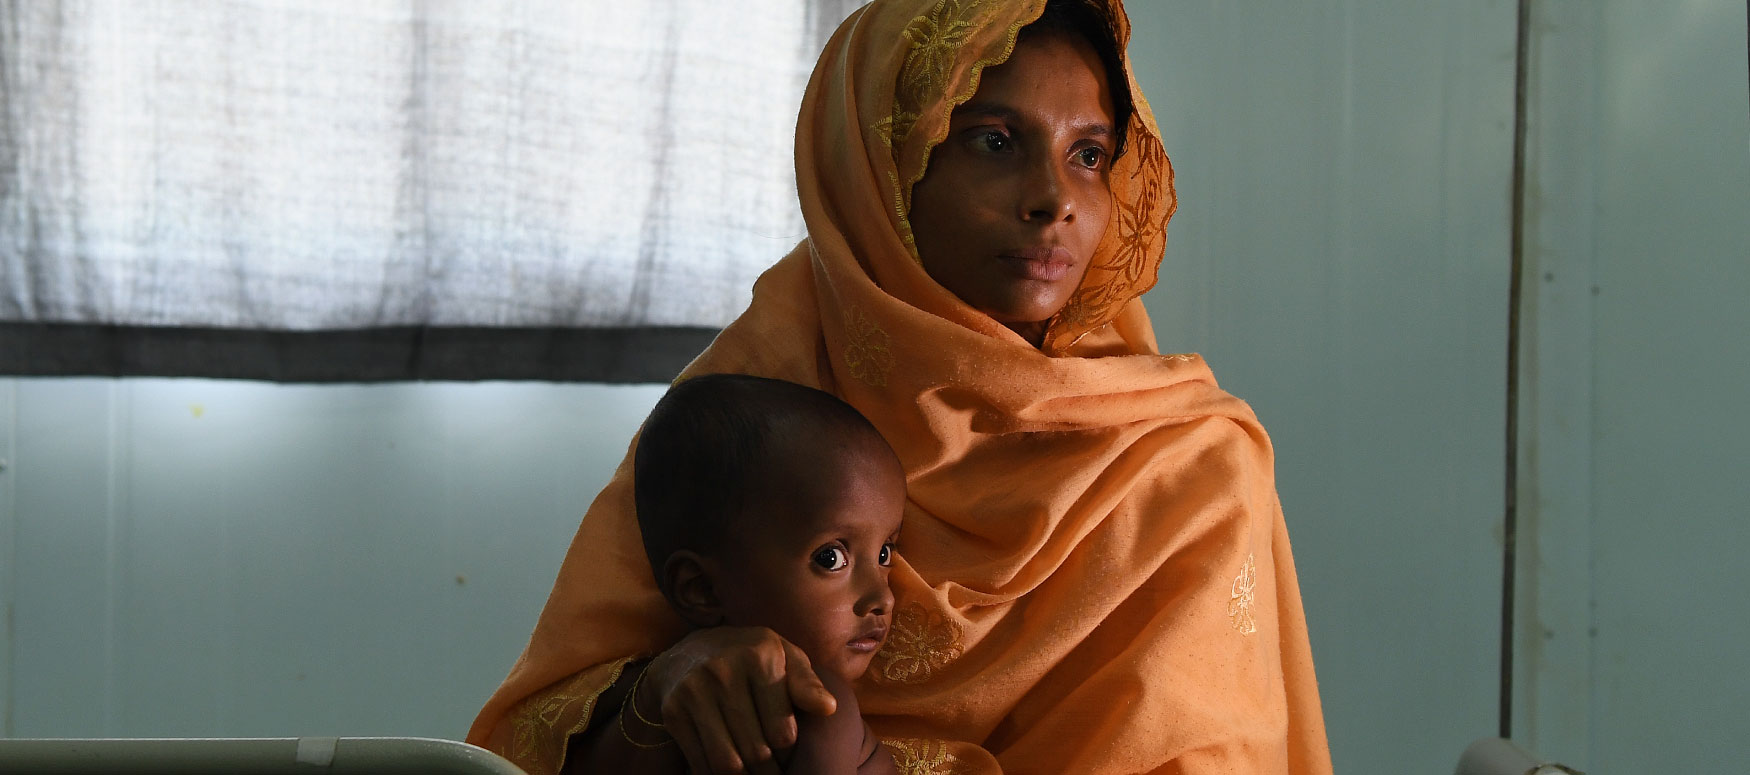 Khadiza, a 22-year-old Rohingya refugee, holds her 12-month-old son, Mohammad Haris, who is being treated for malnutrition at the Medecins Sans Frontieres hospital in the Kutupalong refugee camp in Bangladesh.